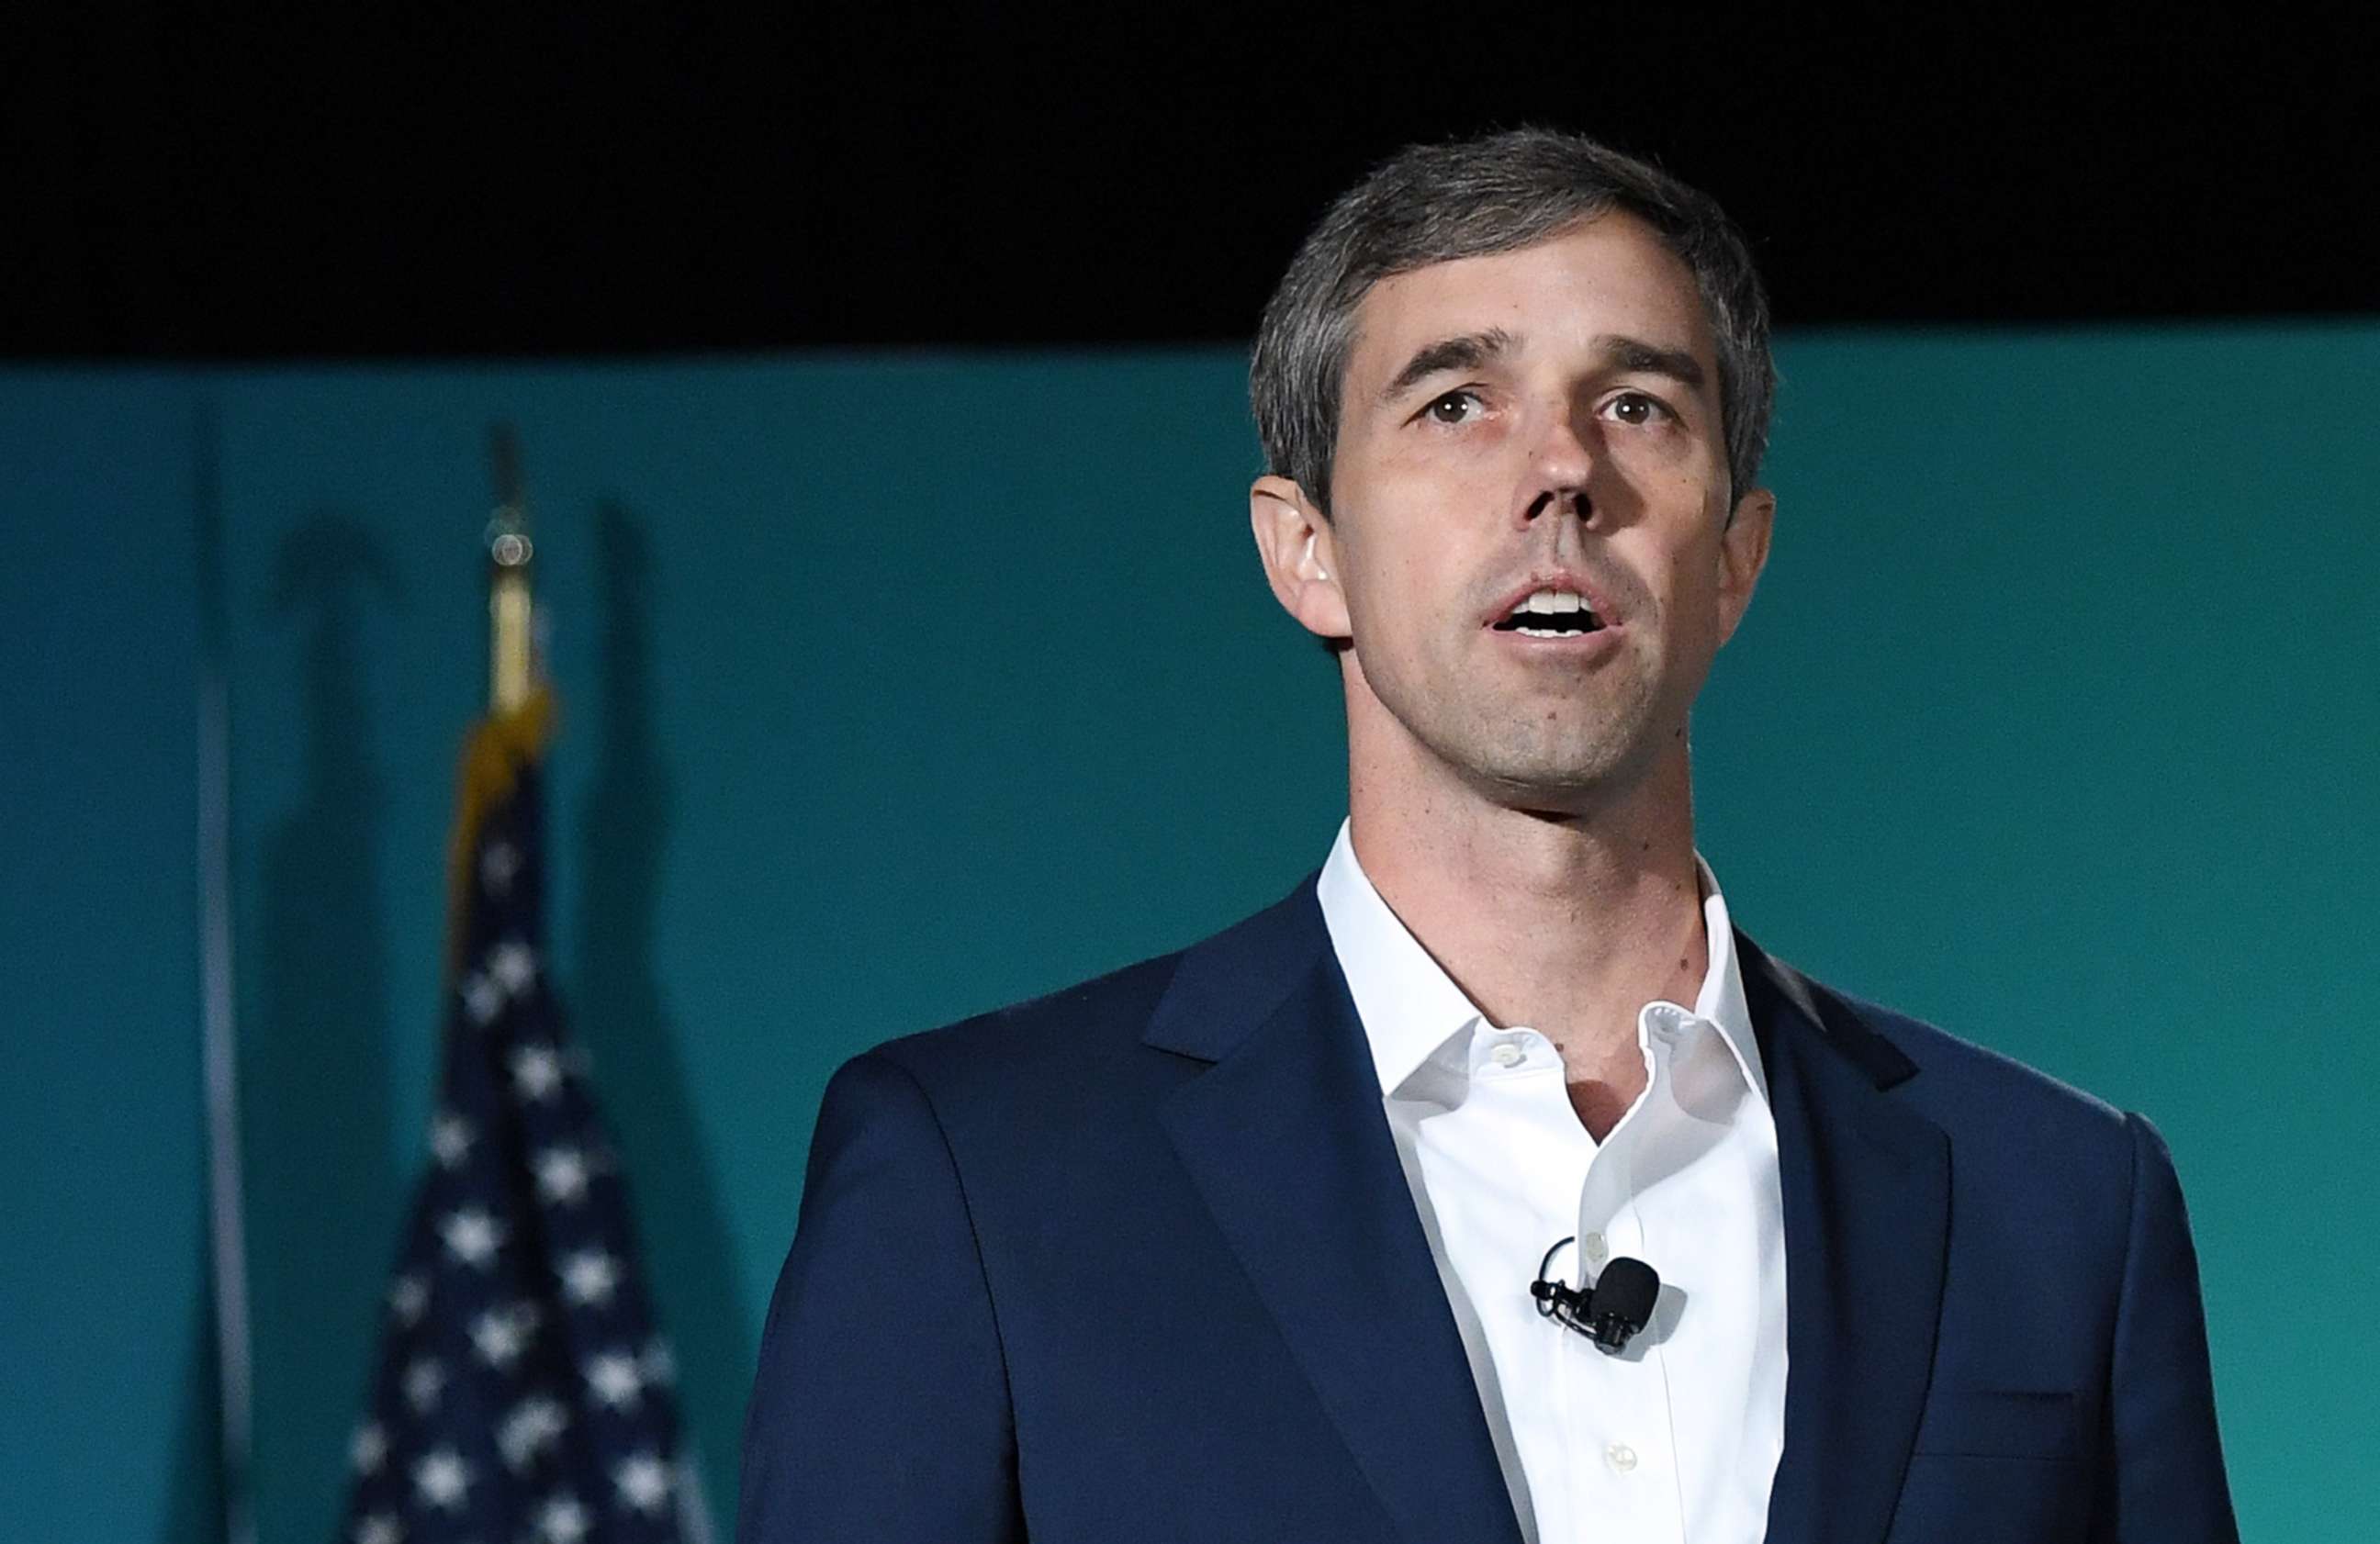 PHOTO: Democratic presidential candidate Beto O'Rourke speaks during the 2020 Public Service Forum hosted by the American Federation of State, County and Municipal Employees (AFSCME) at UNLV on Aug. 3, 2019 in Las Vegas.